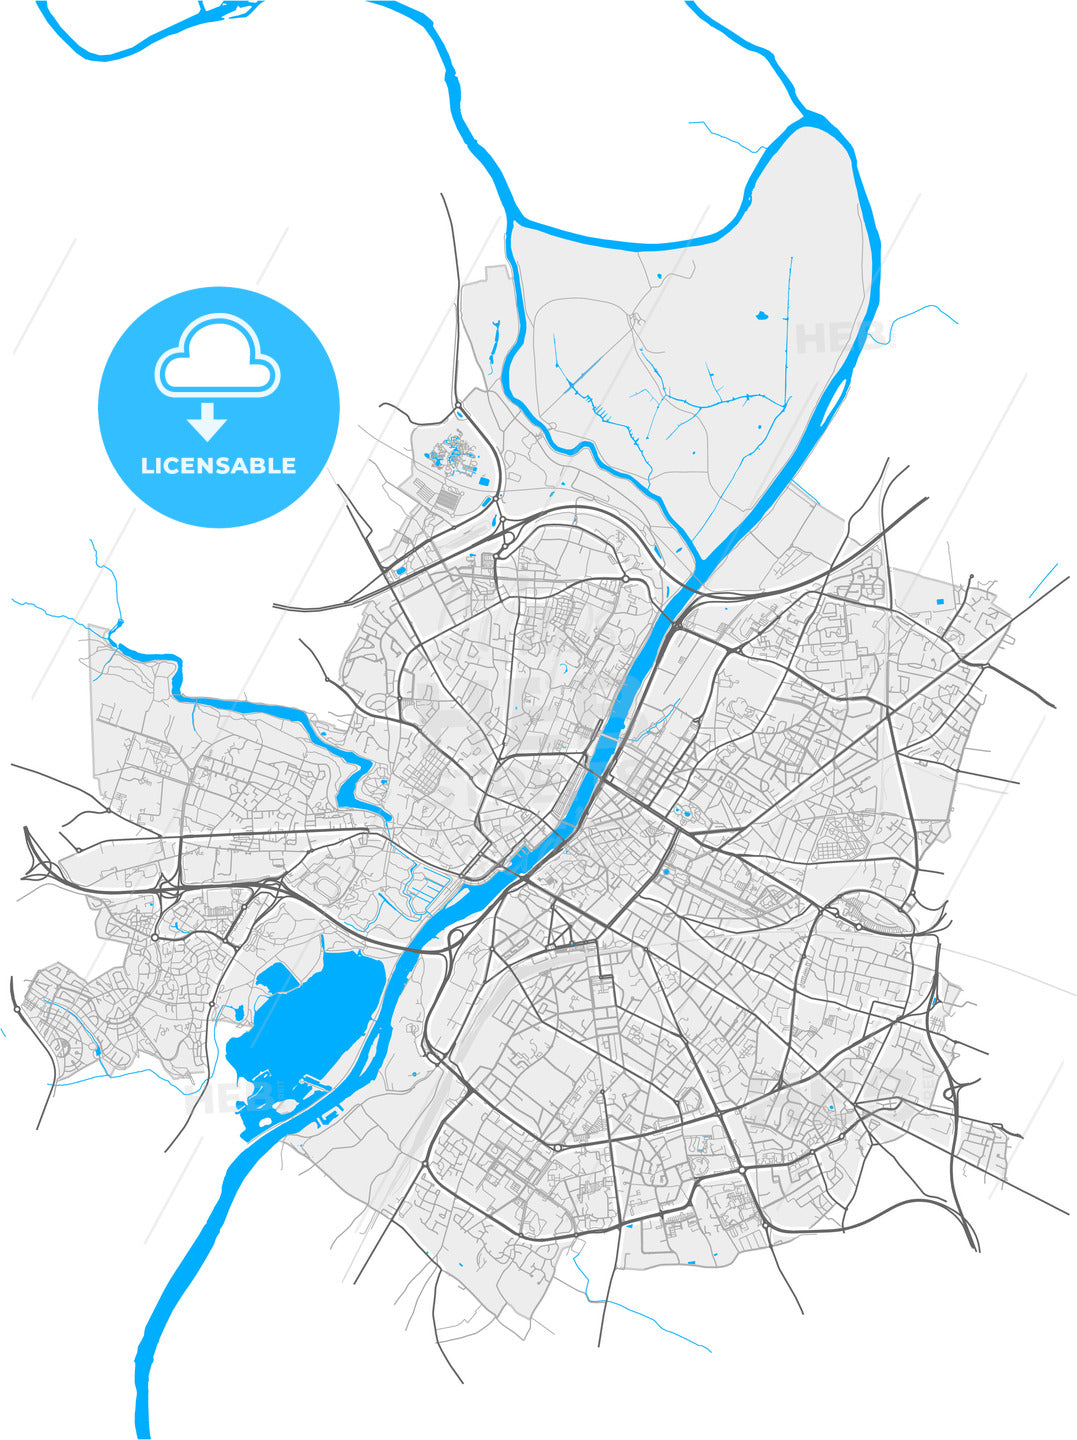 Angers, Maine-et-Loire, France, high quality vector map